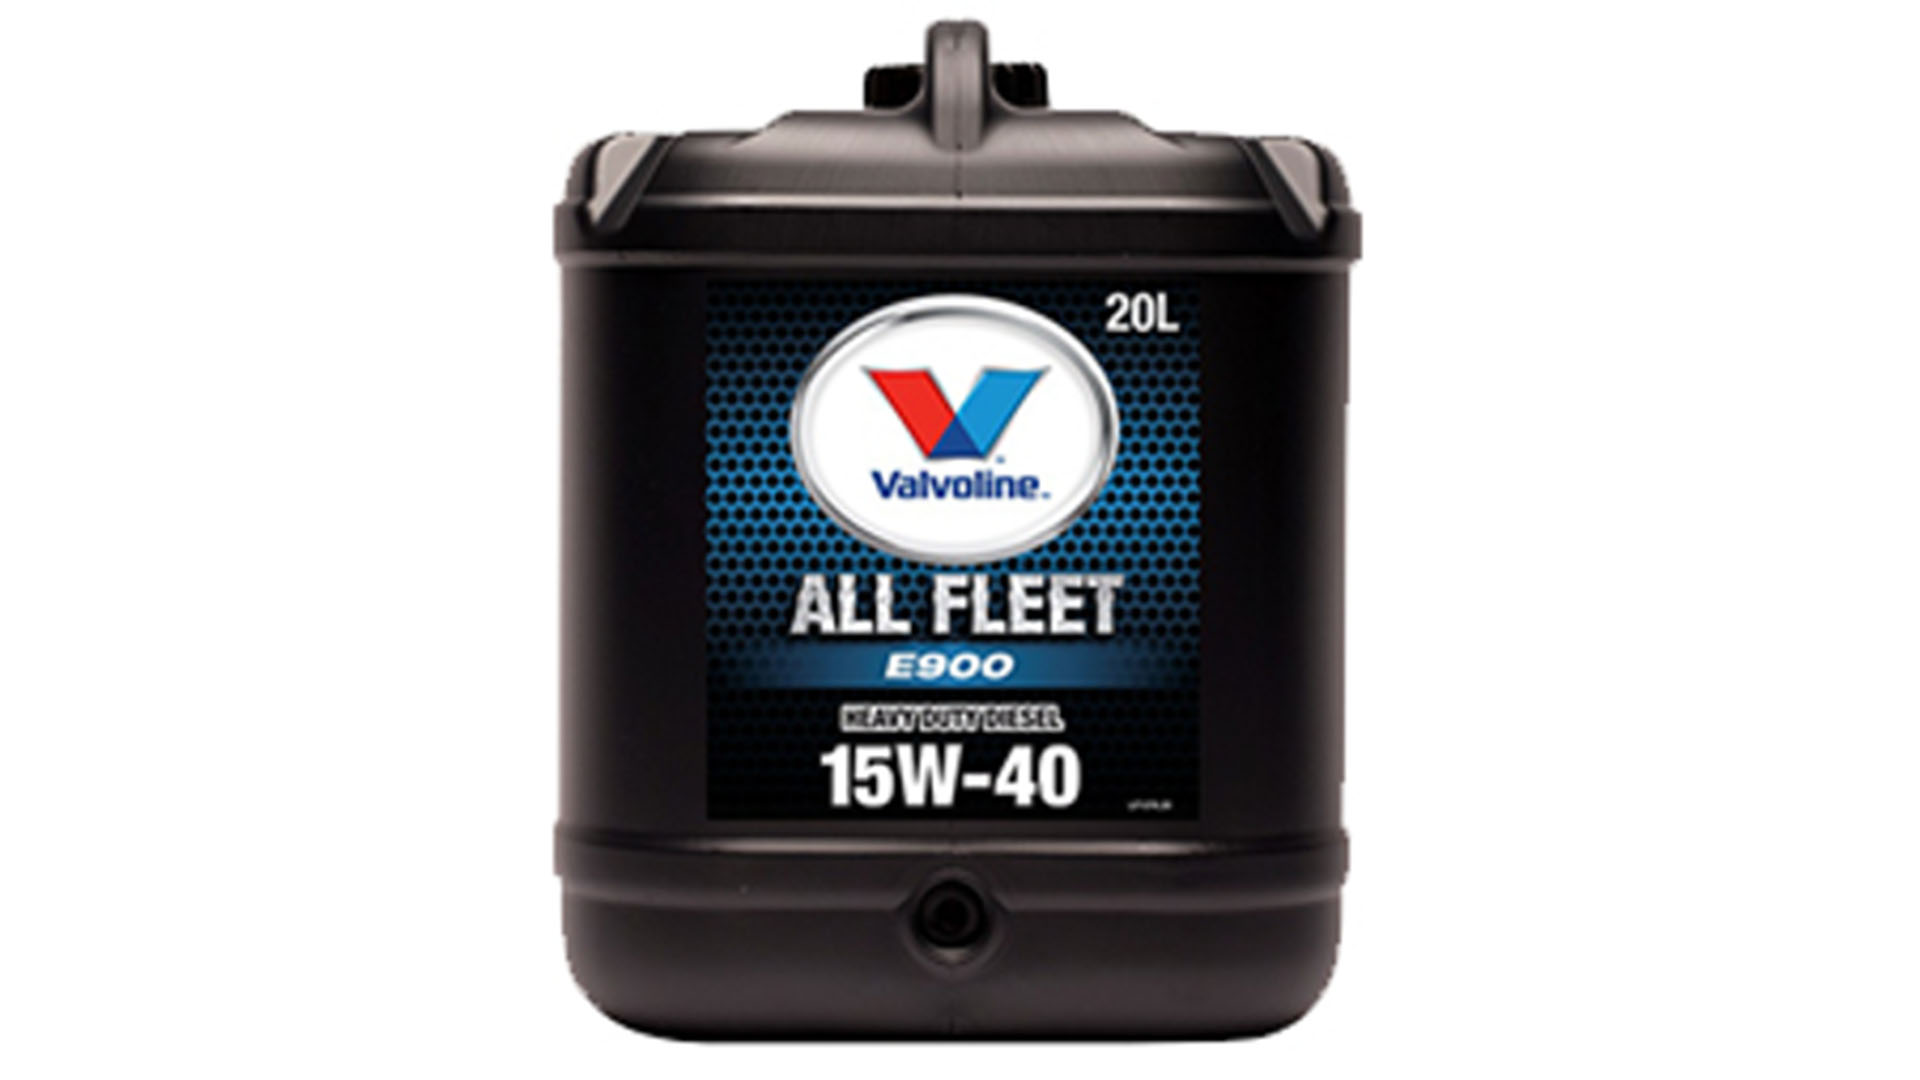 Service of diesel and electric powered equipment | Hyundai Forklifts Sales, Service and Hire | Distributors of Valvoline and Hi-Tech Oils